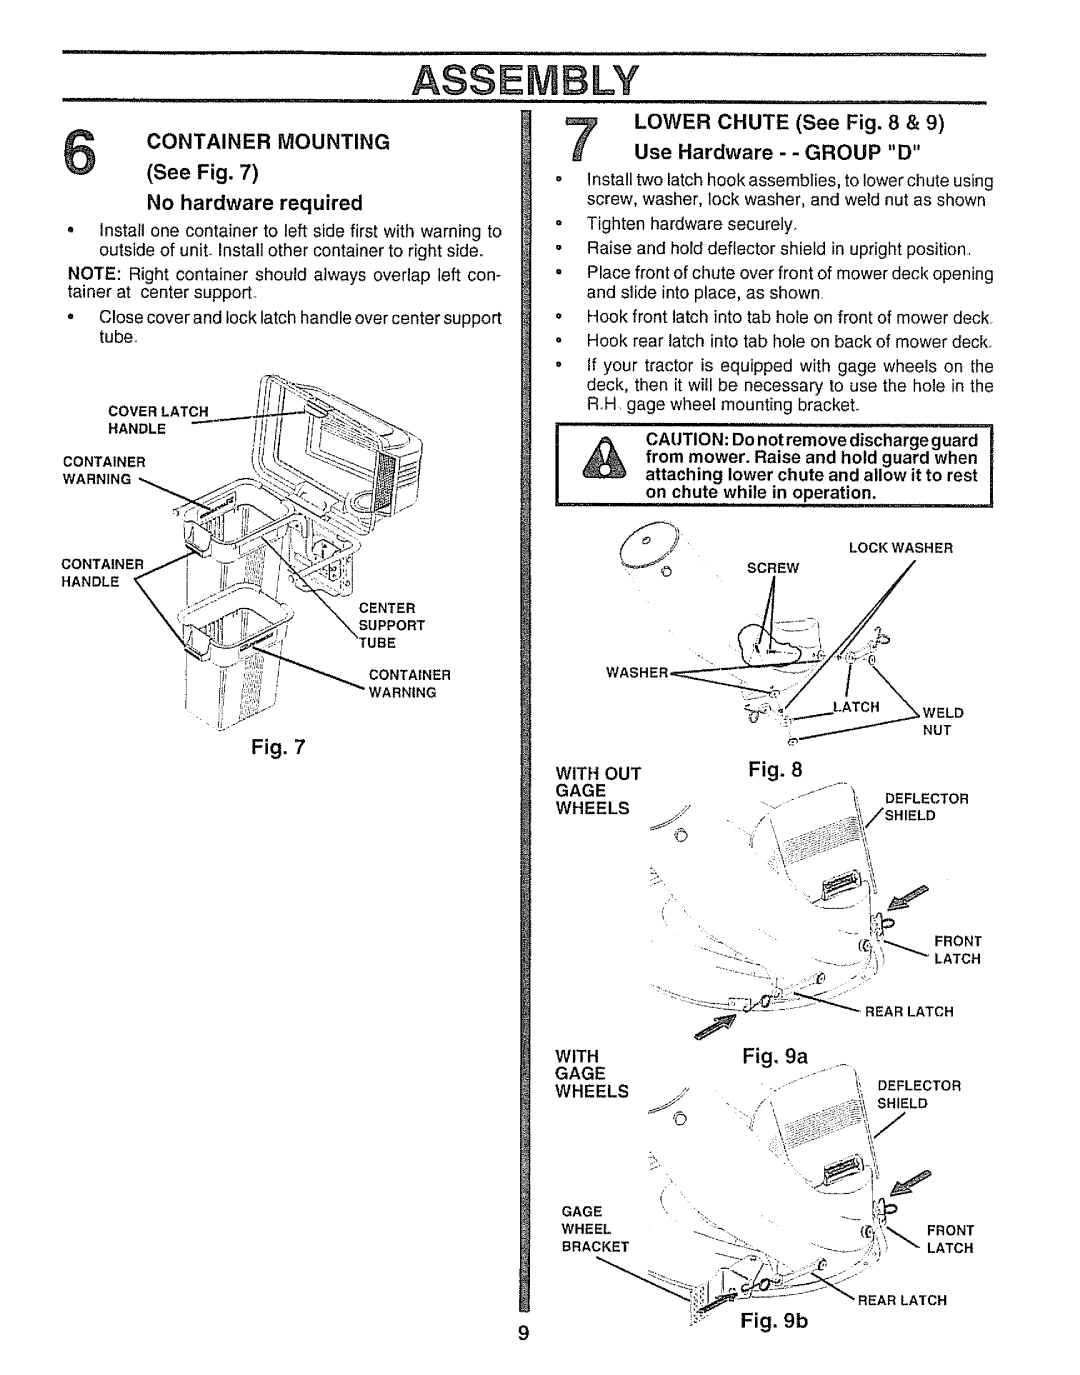 Sears 917.249491 owner manual LOWER CHUTE See & Use Hardware--GROUP D, Assembly, CONTAINER MOUNTING See Fig 